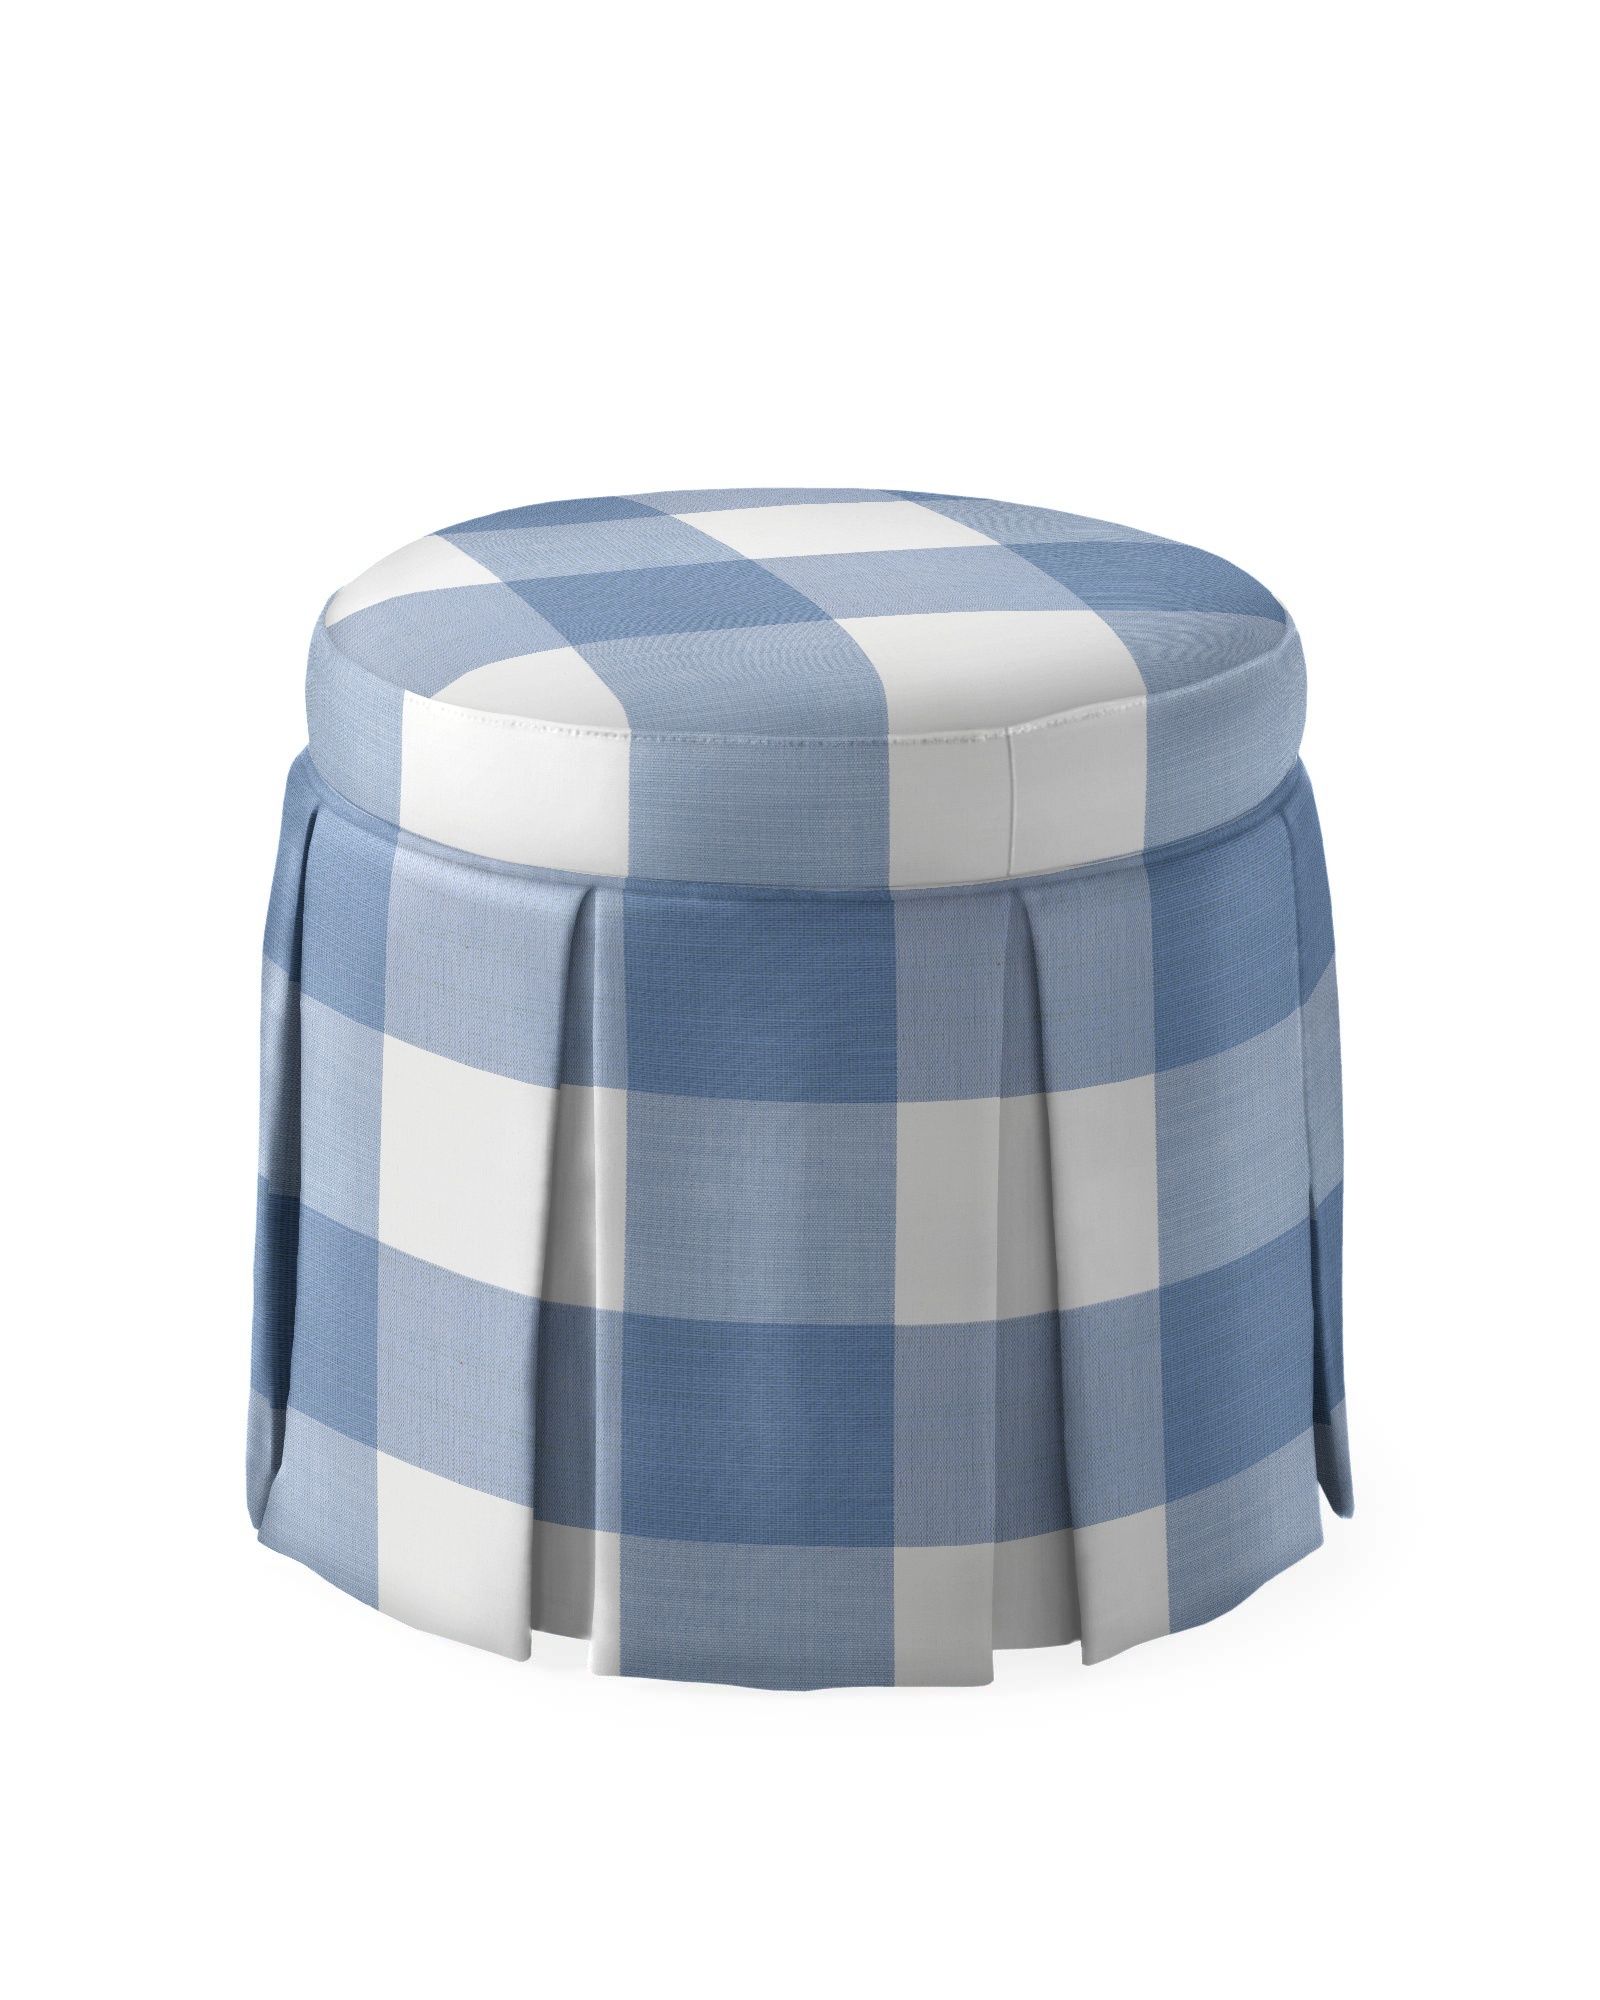 Harrison Round Stool - Skirted | Serena and Lily